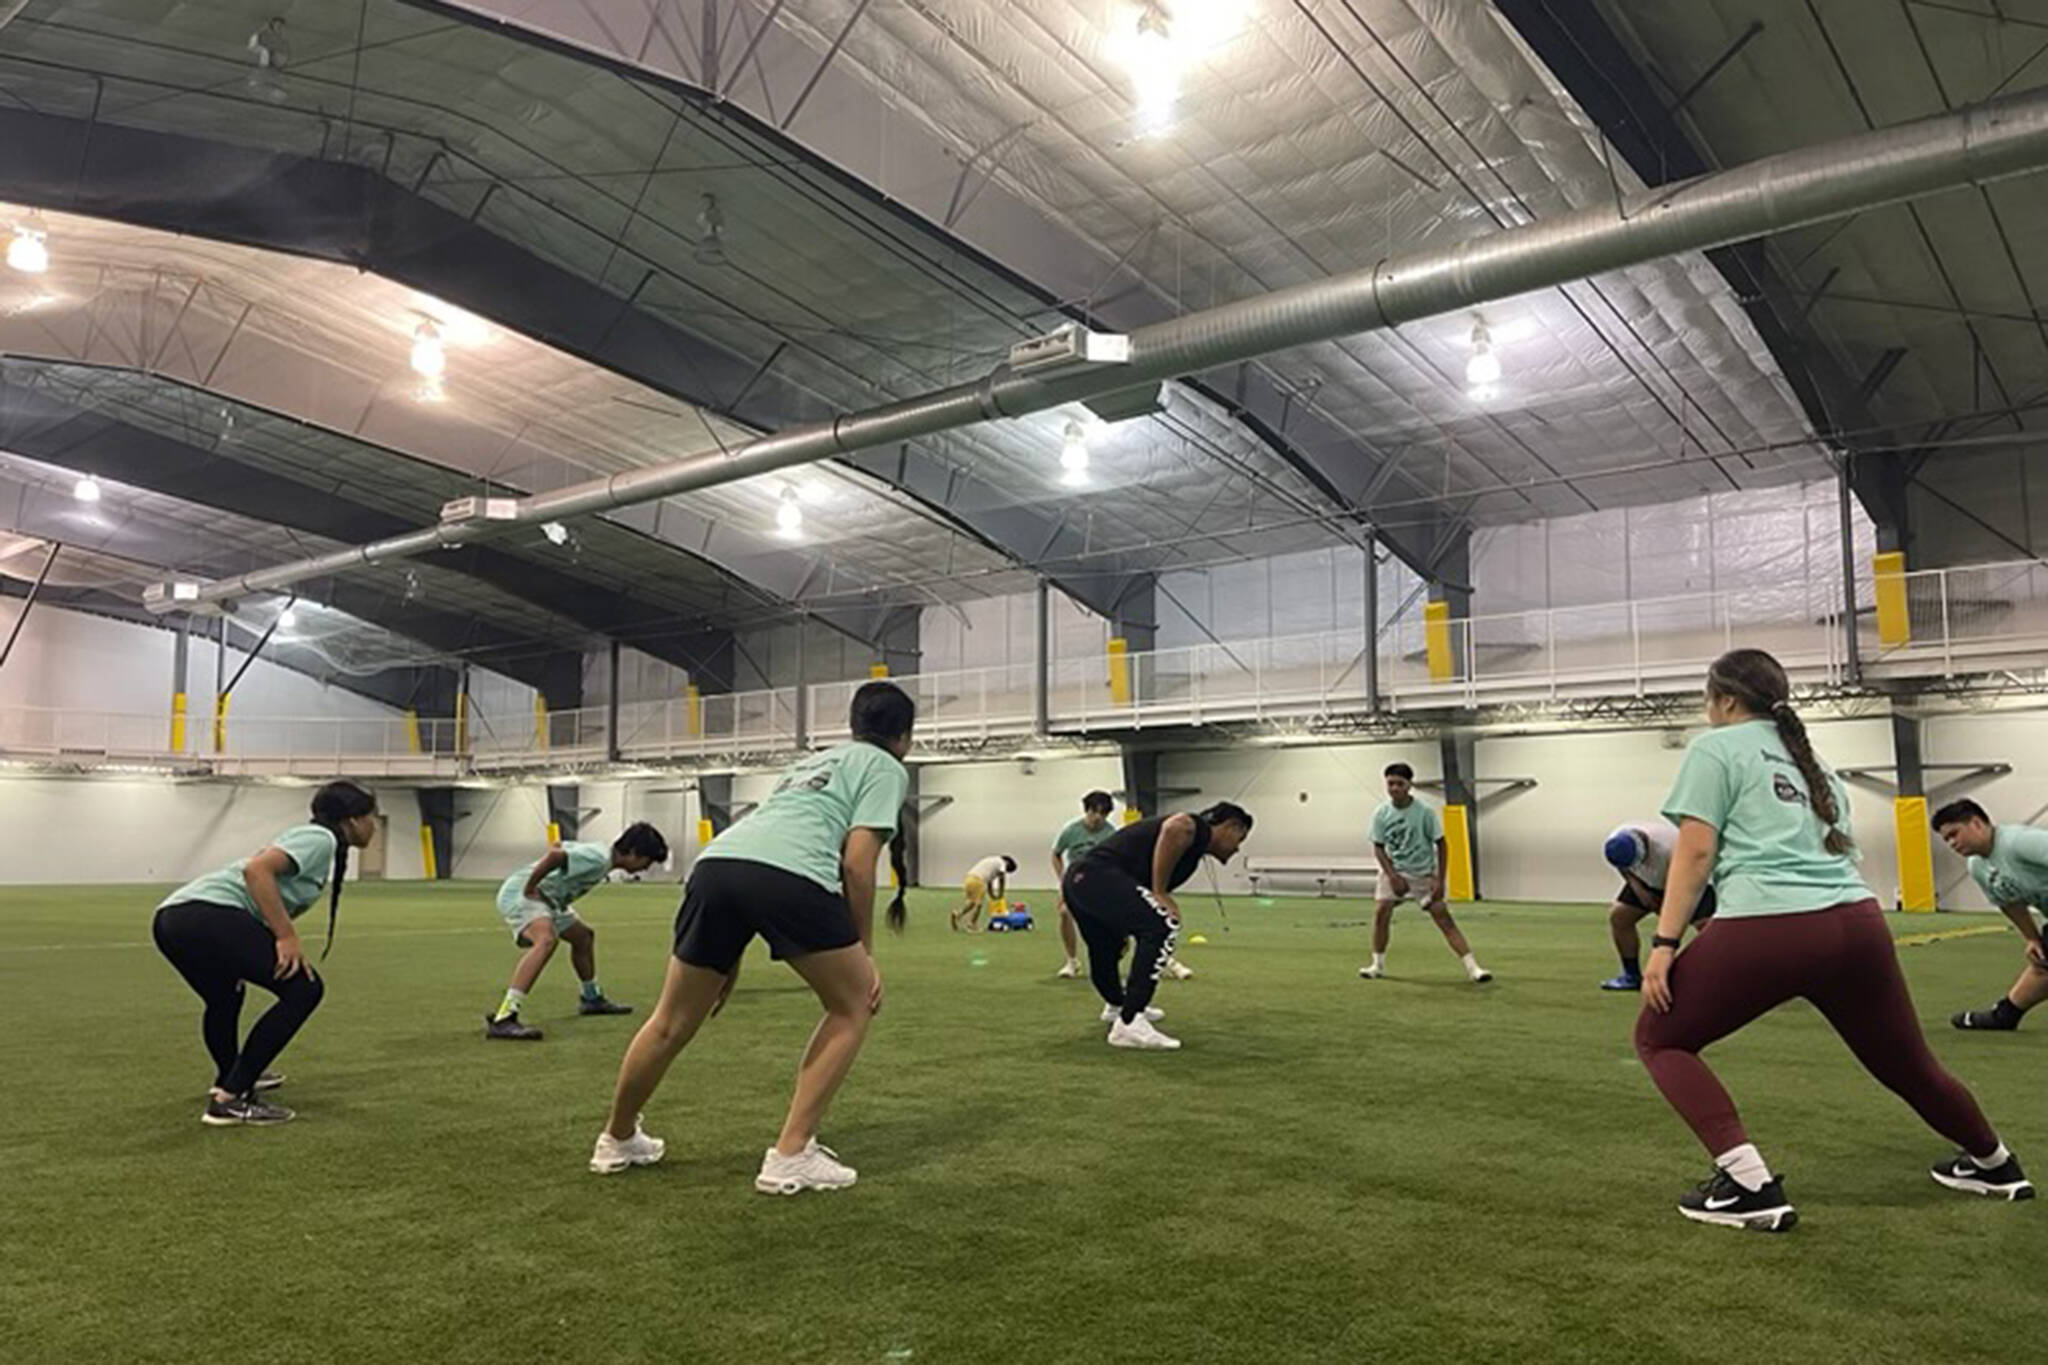 Former NFL defensive tackle leads an exercise inside the Dimond Park Field House. The former pro has been helping local athletes refine their skills while in town. (Courtesy Photo)